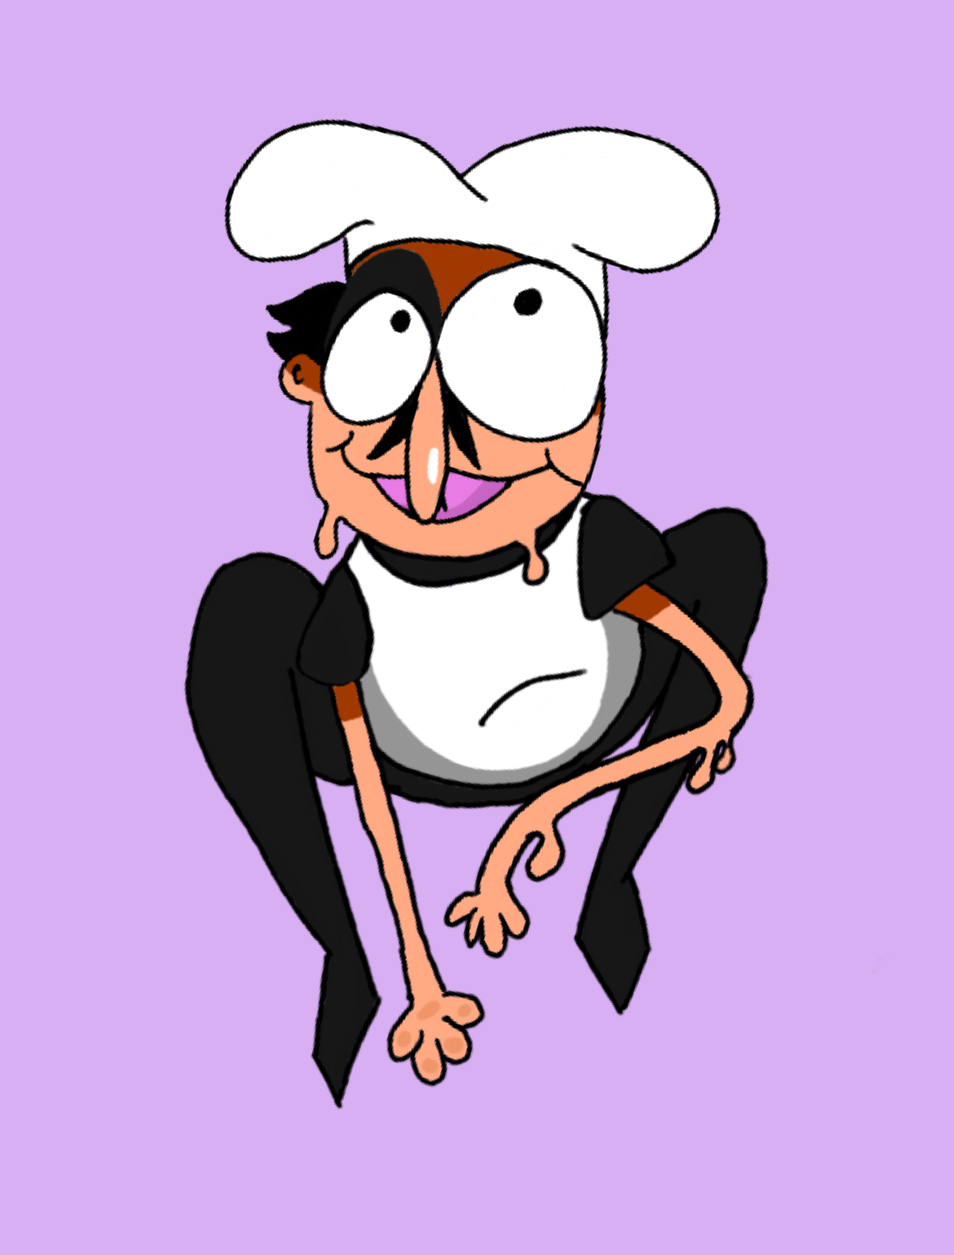 Peppino Angry Pose - Pizza Tower by CasualMarvelFan on DeviantArt